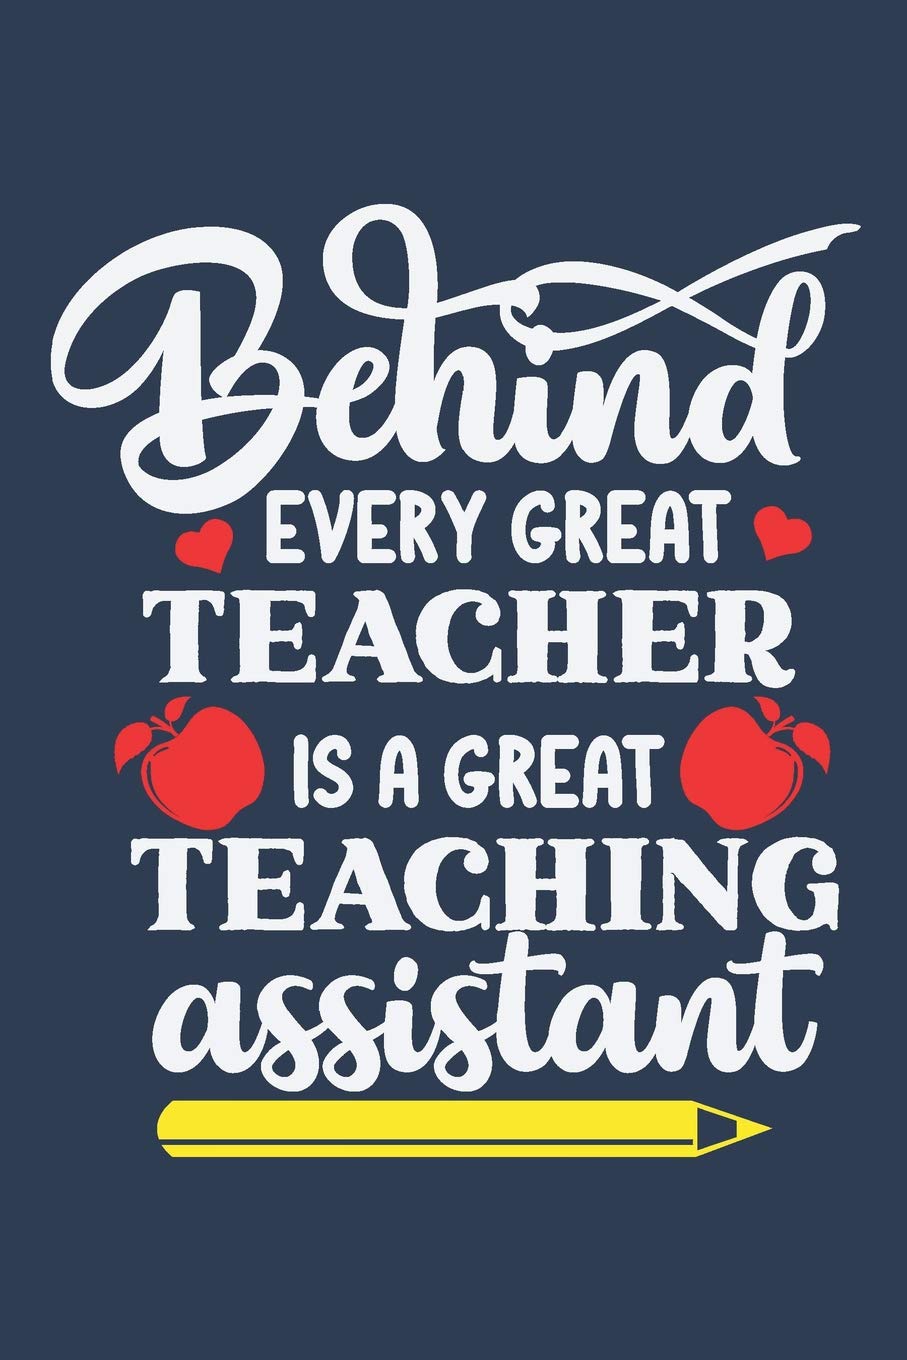 Behind every great teacher is a great teaching assistant sign